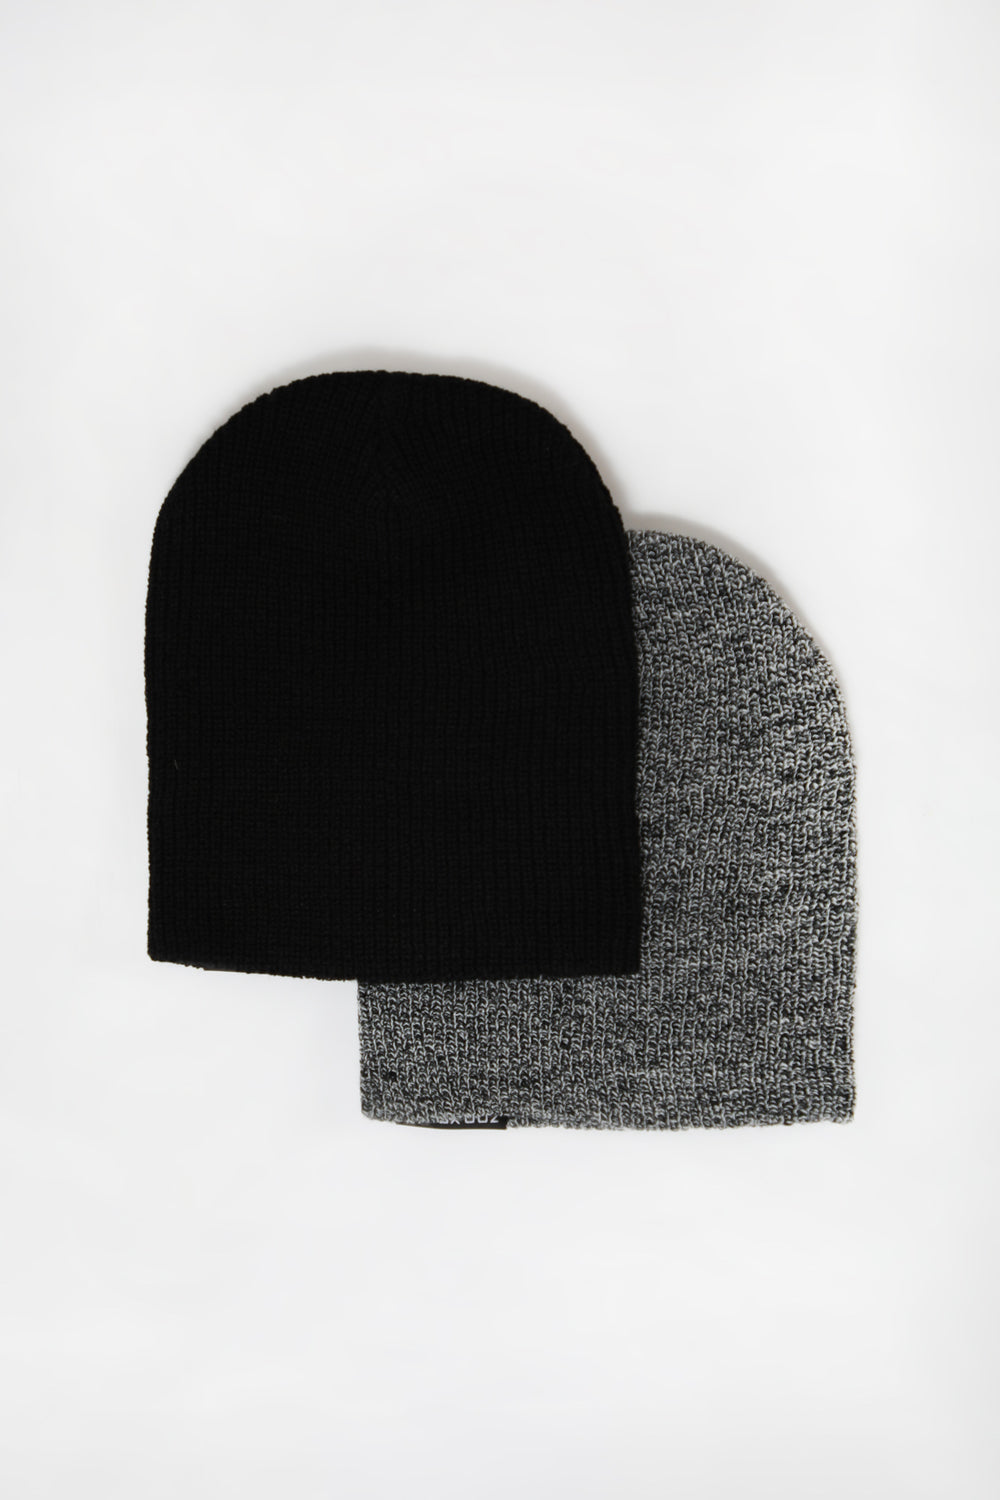 Zoo York Youth Slouch Beanie 2-Pack Black with White